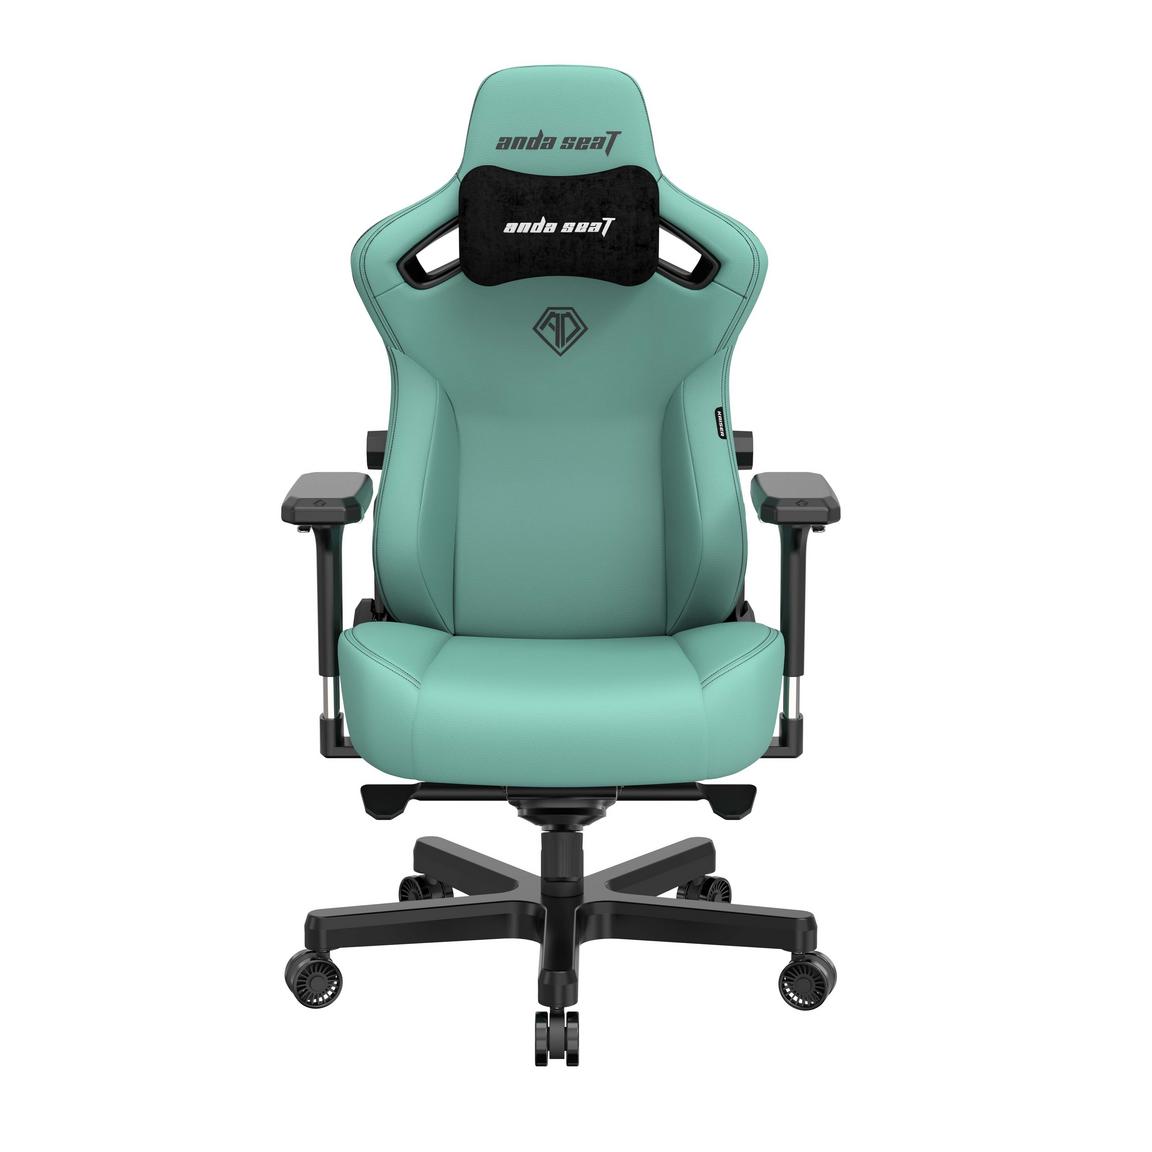 AndaSeat Kaiser 3 XL Gaming Chair - Green PVC Leather